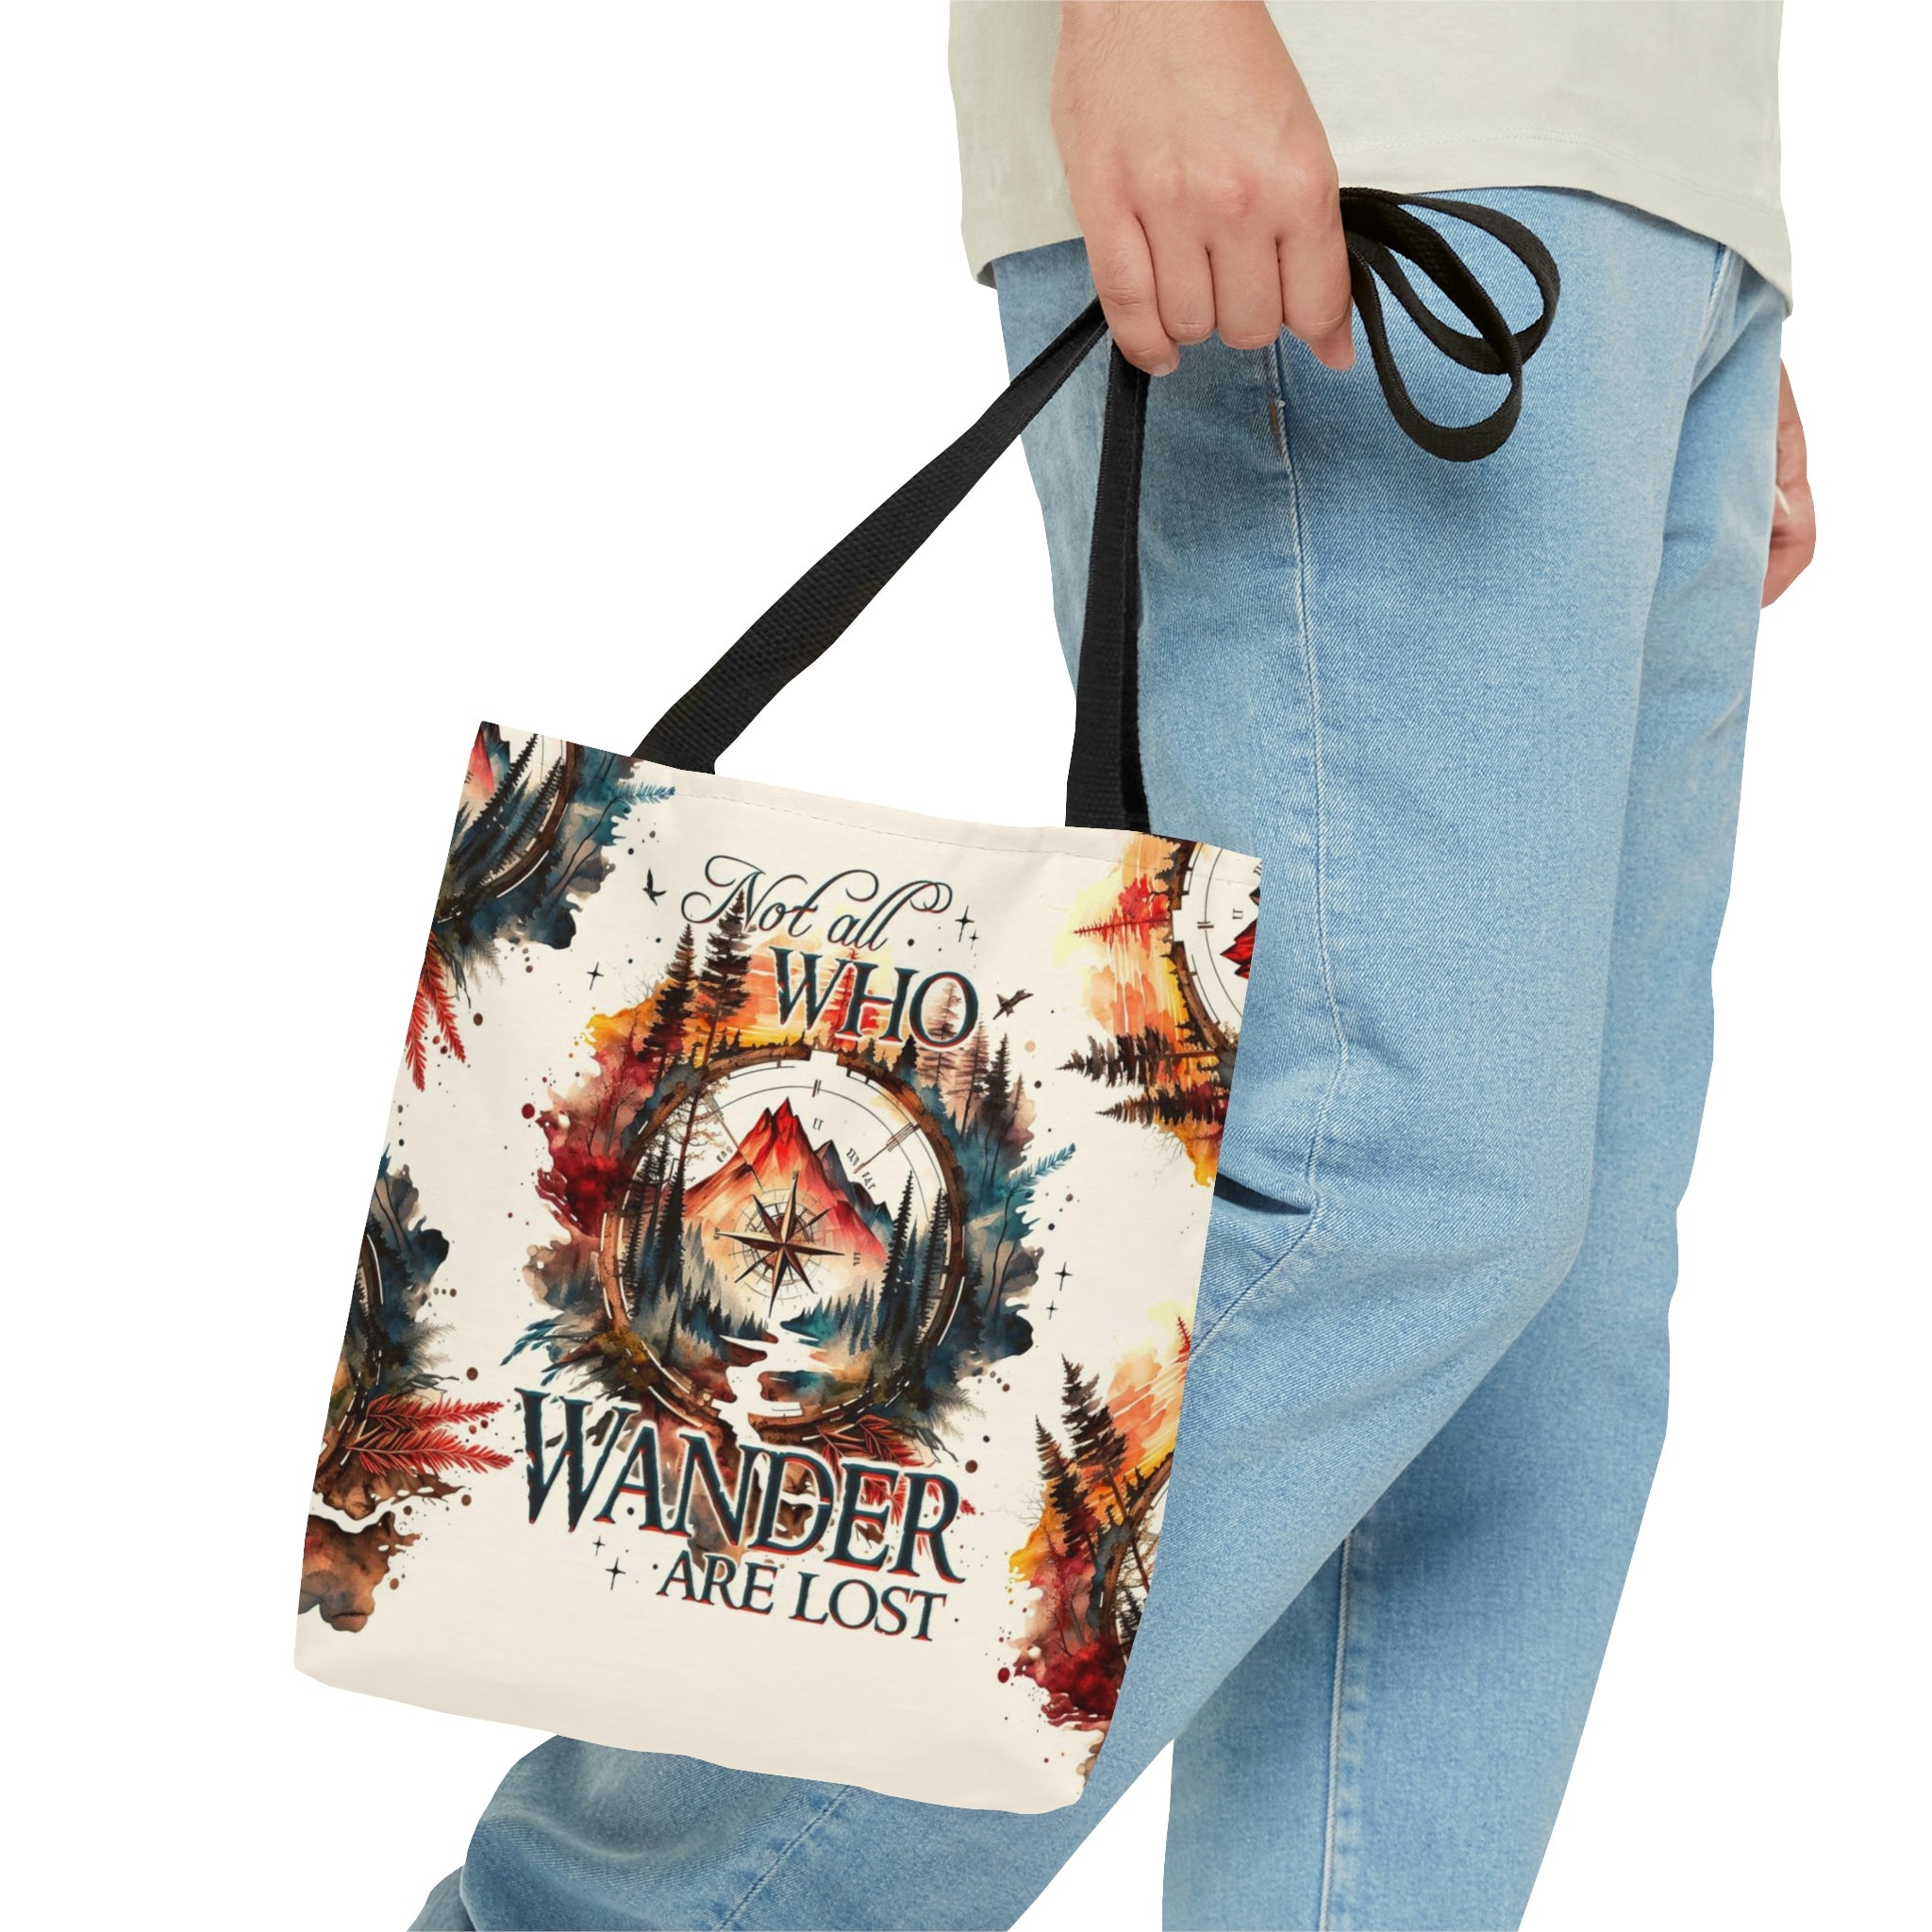 NOT ALL WHO WANDER ARE LOST TOTE BAG - TY1605233